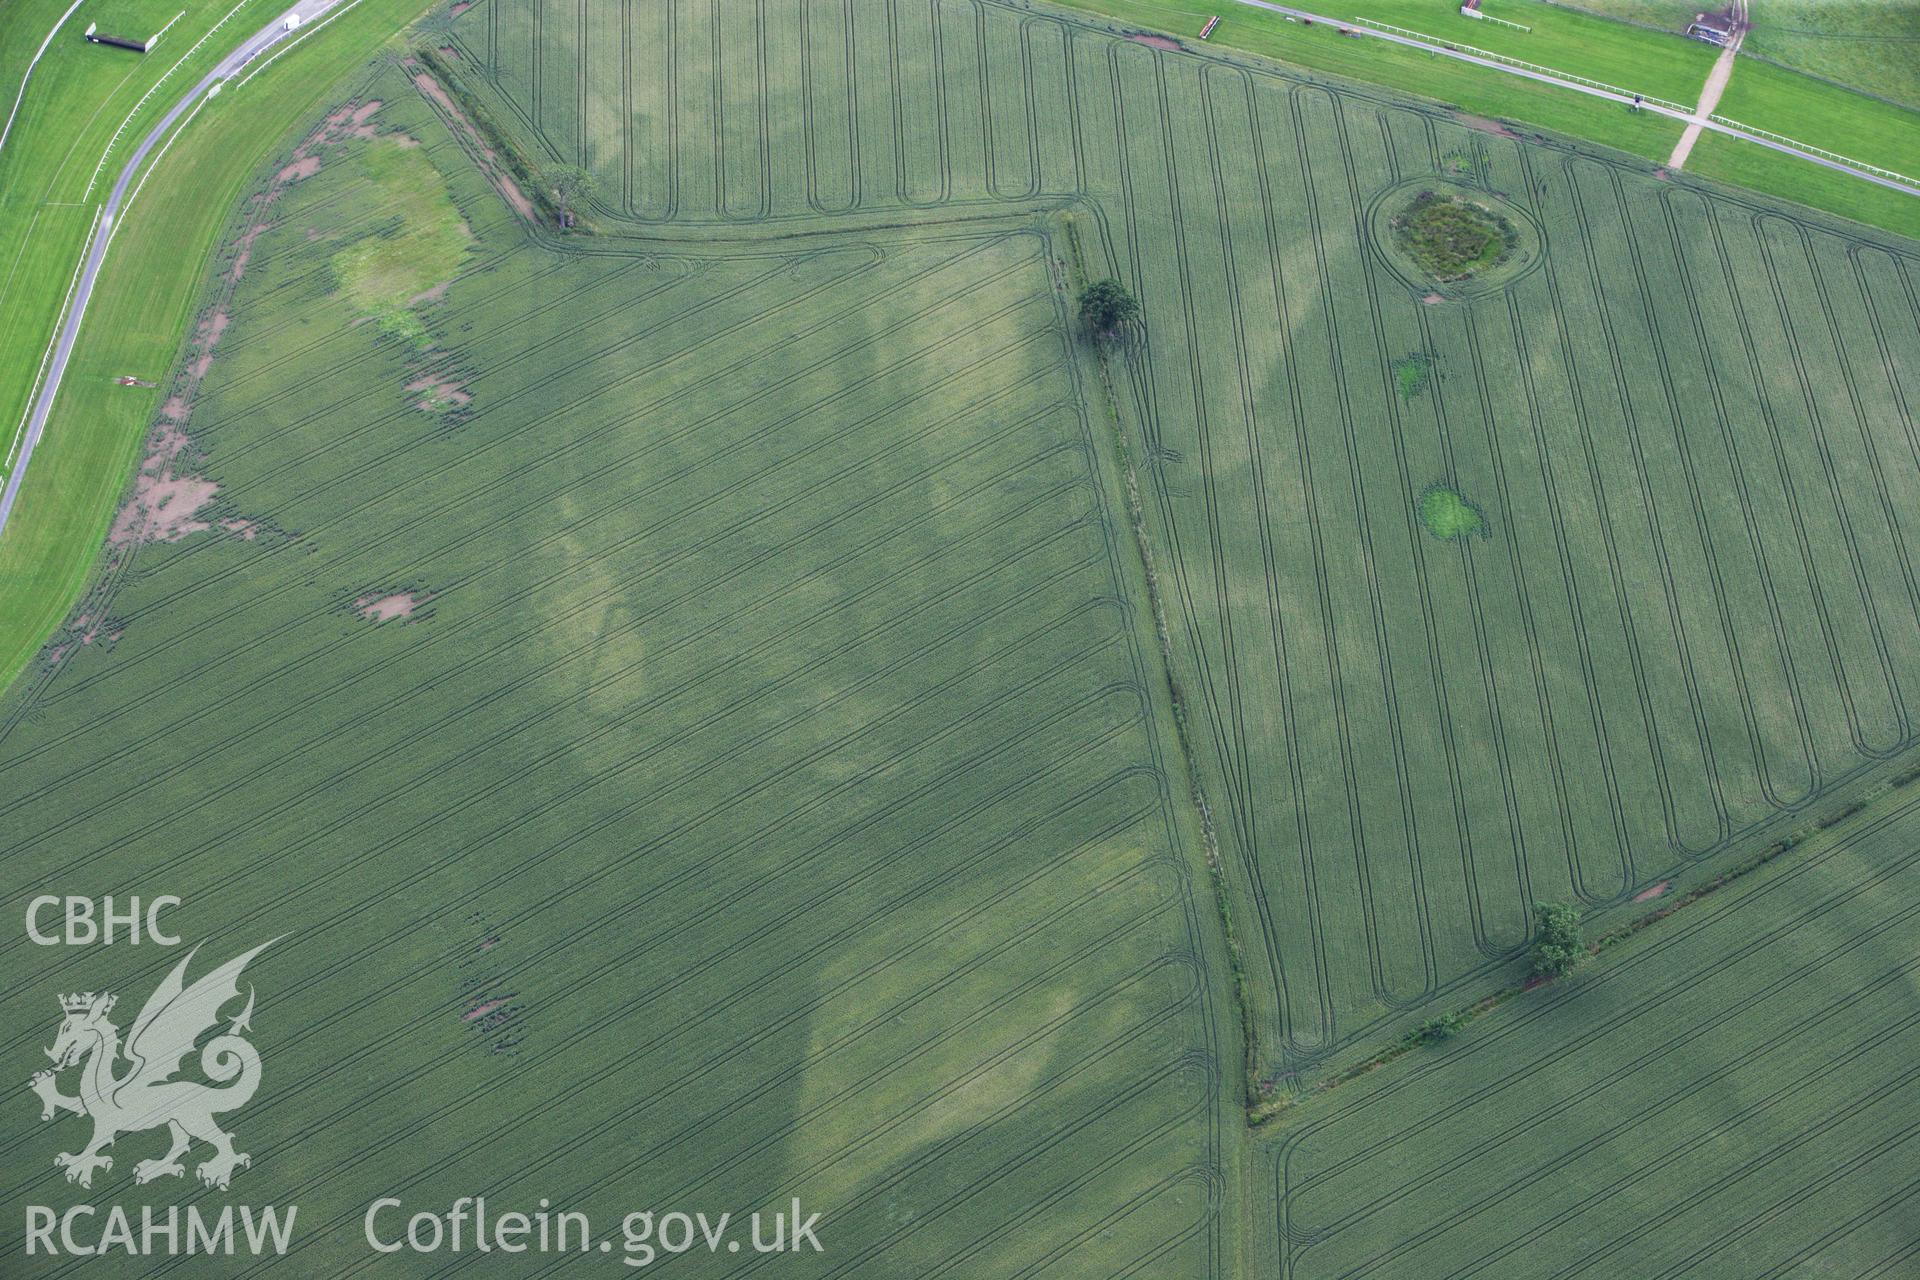 RCAHMW colour oblique aerial photograph of Bangor Race Course Enclosure. Taken on 08 July 2009 by Toby Driver